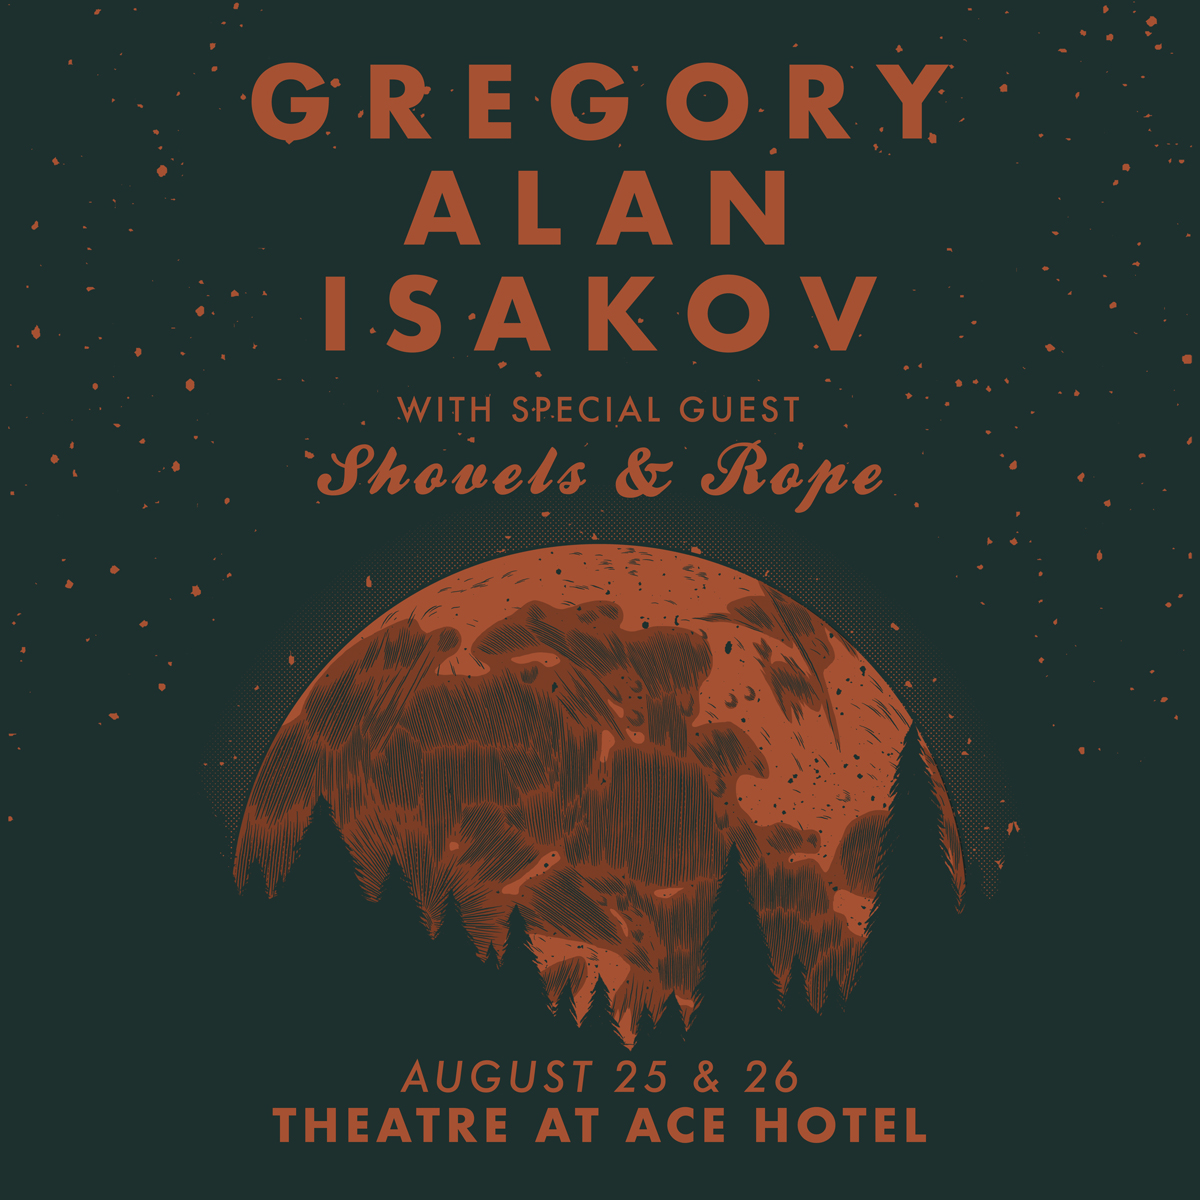 Hand-drawn image of a red moon with dark trees in the foreground and red stars in the background. Text above reads "Gregory Alan Isakov with special guest Shovels & Rope"